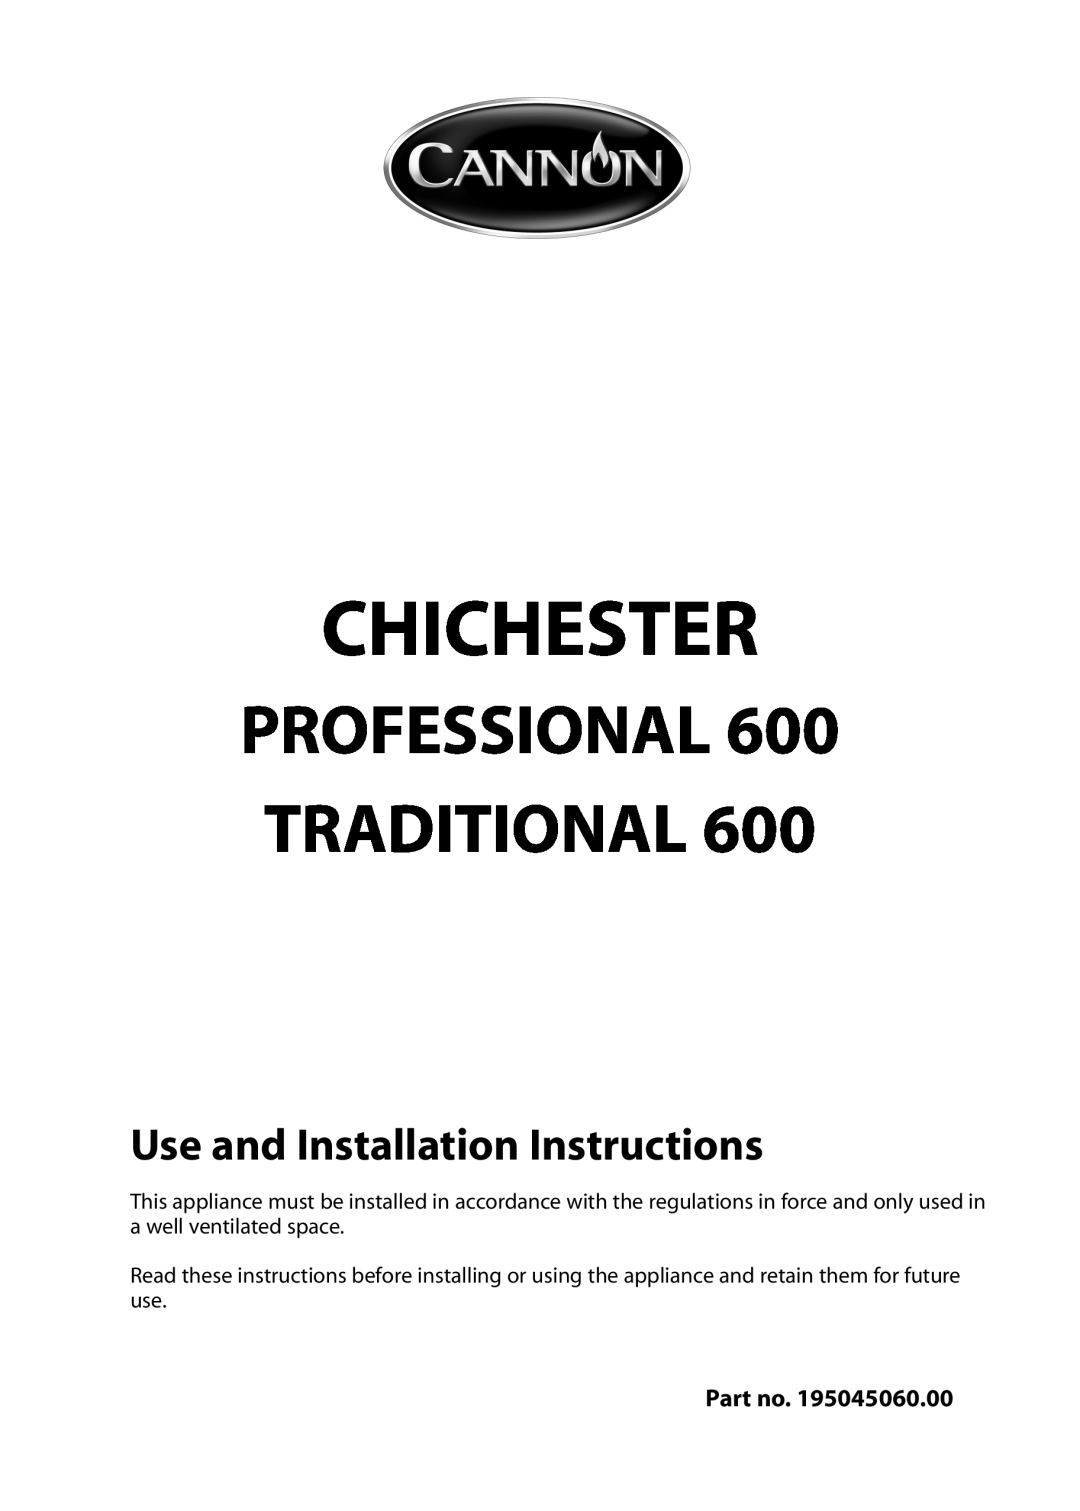 Cannon 10675G, 10670G installation instructions Use and Installation Instructions, Chichester, Professional Traditional 